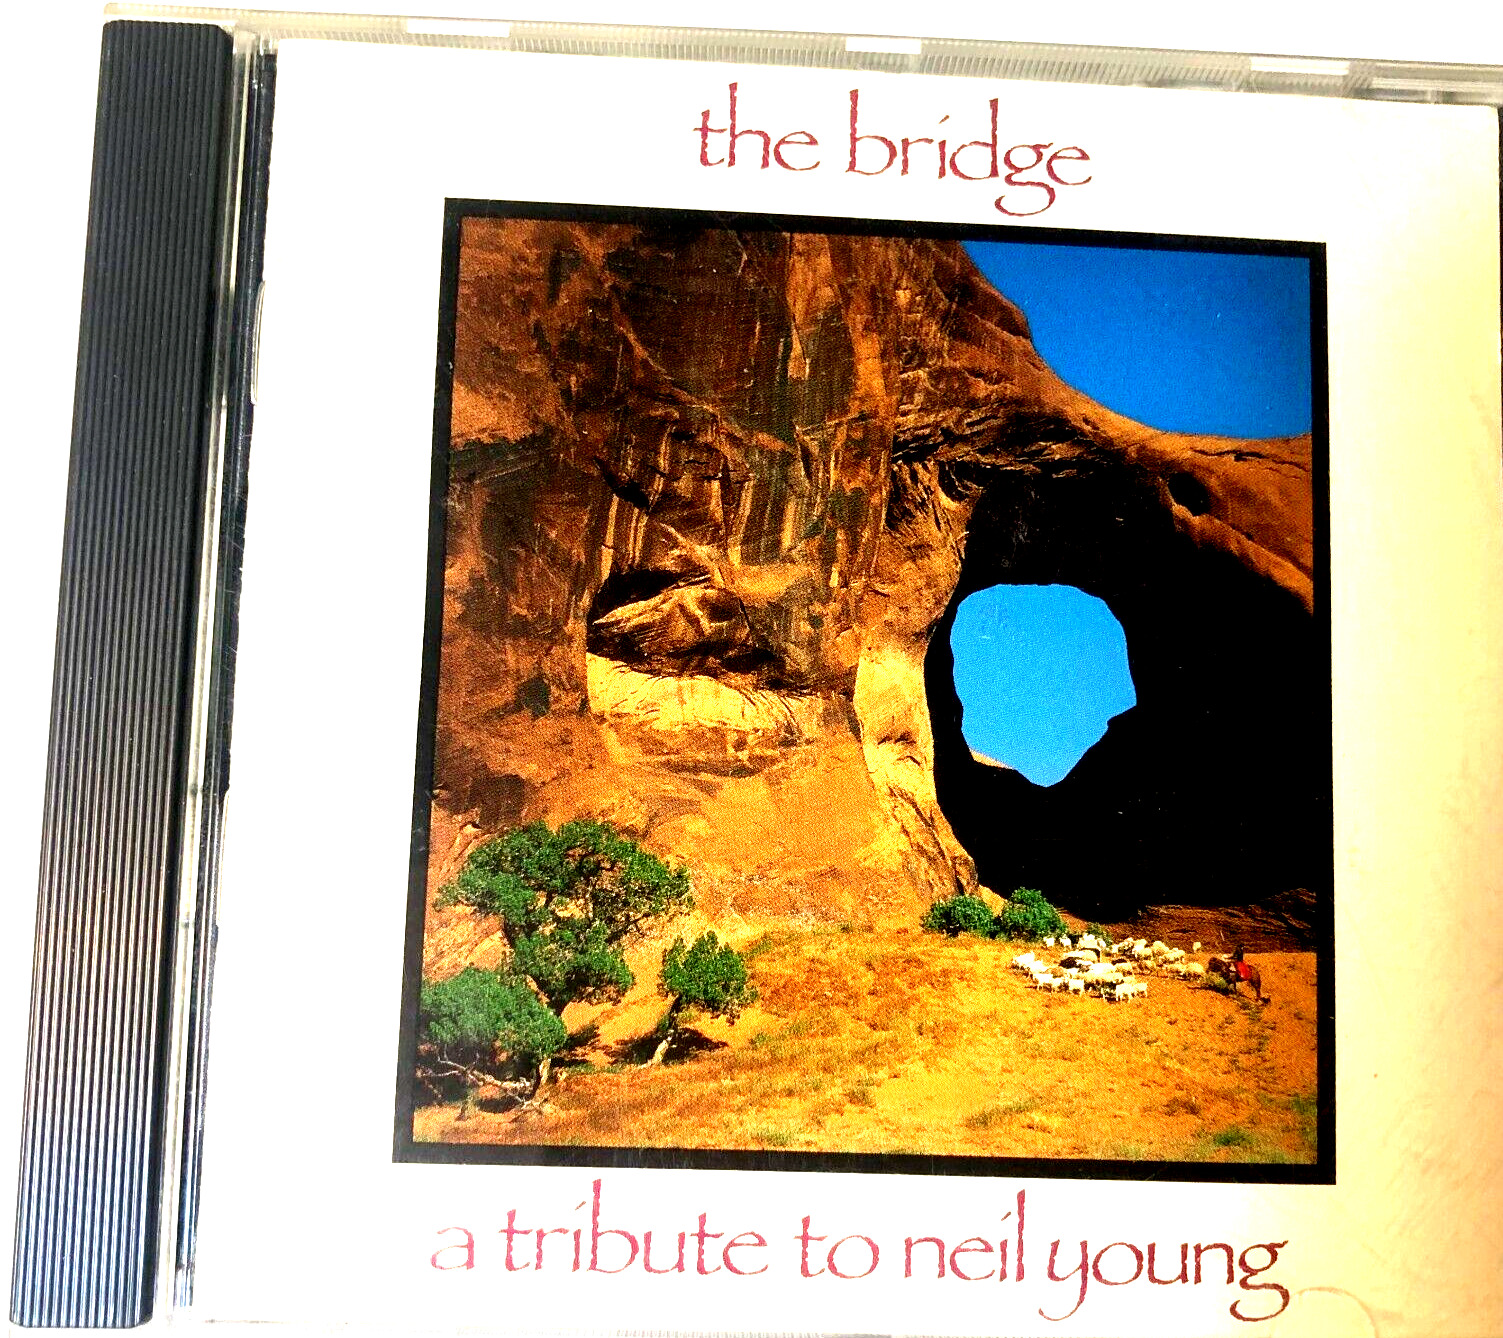 Neil Young The Bridge A Tribute to CD Flaming Lips Pixies Sonic Youth Dinosaur J